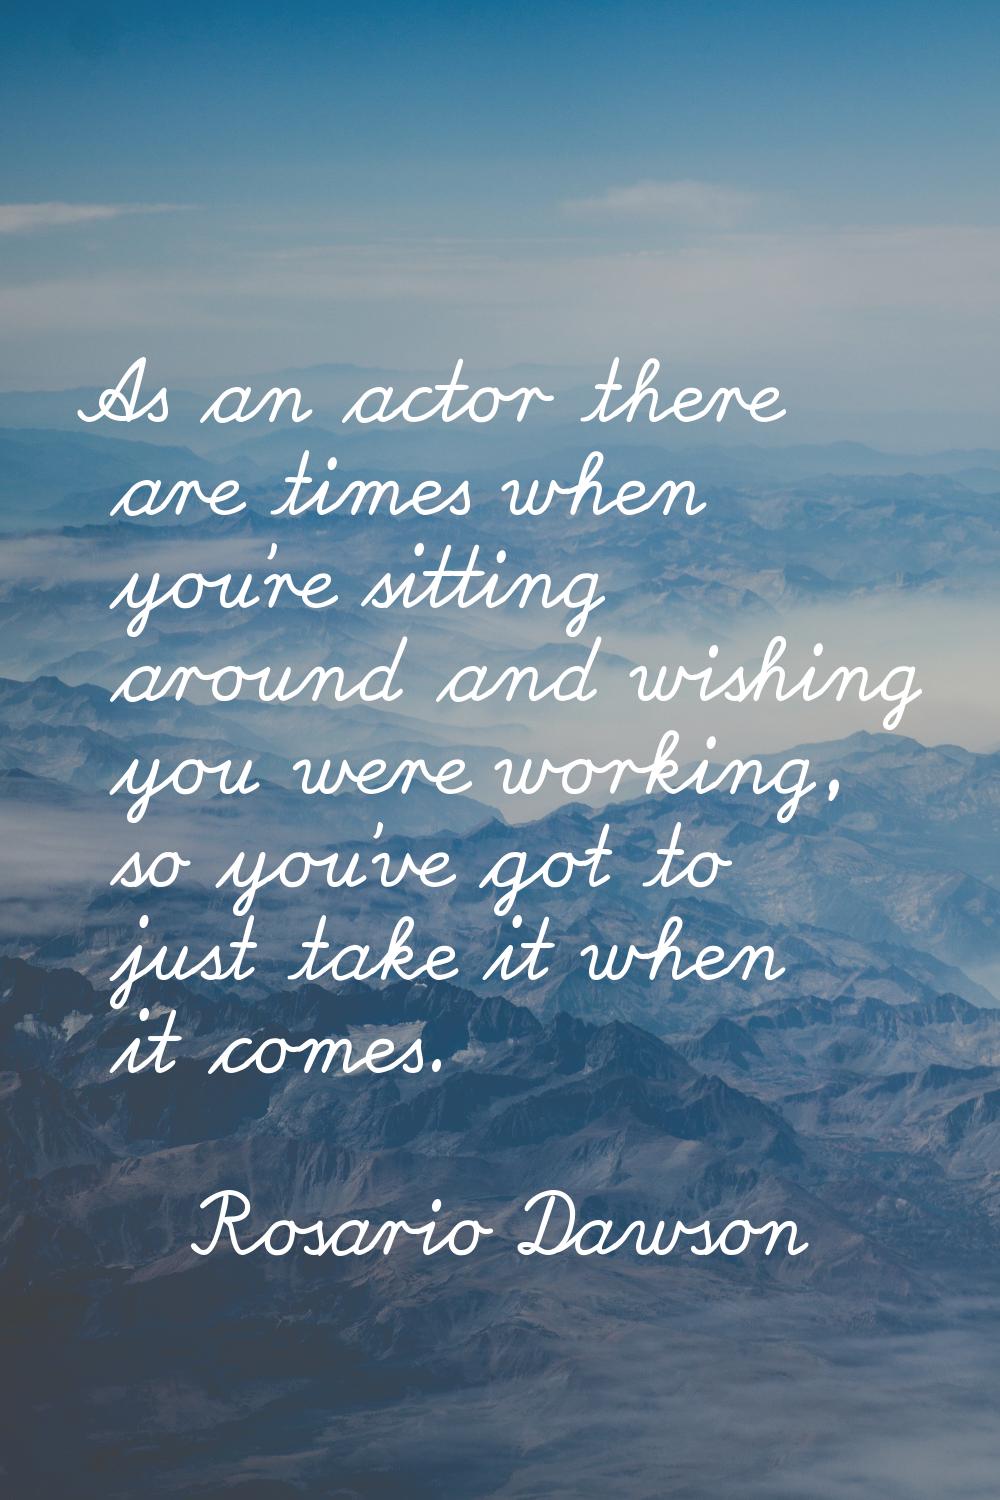 As an actor there are times when you're sitting around and wishing you were working, so you've got 